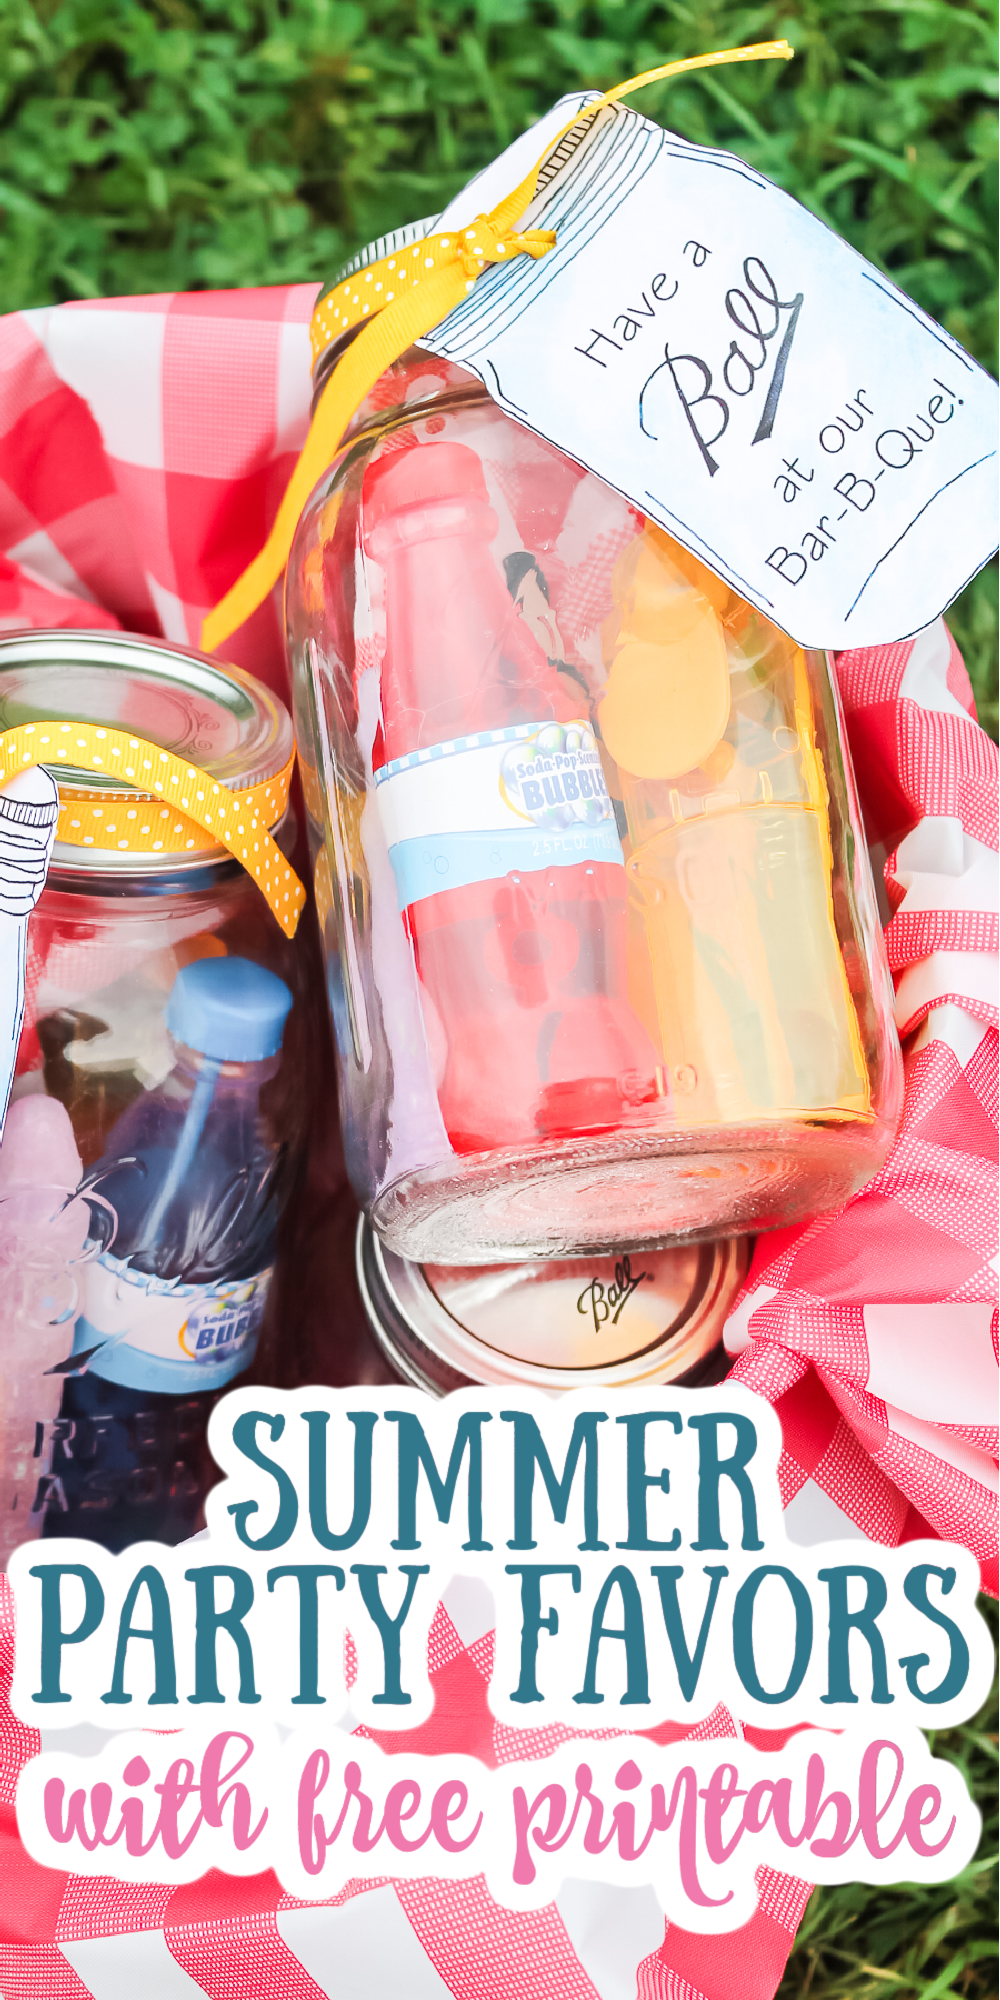 Make these summer party favors for the guests at your BBQ! Cute printable tags to add to mason jars then fill with a ton of goodies! #summerparty #summer #bbq